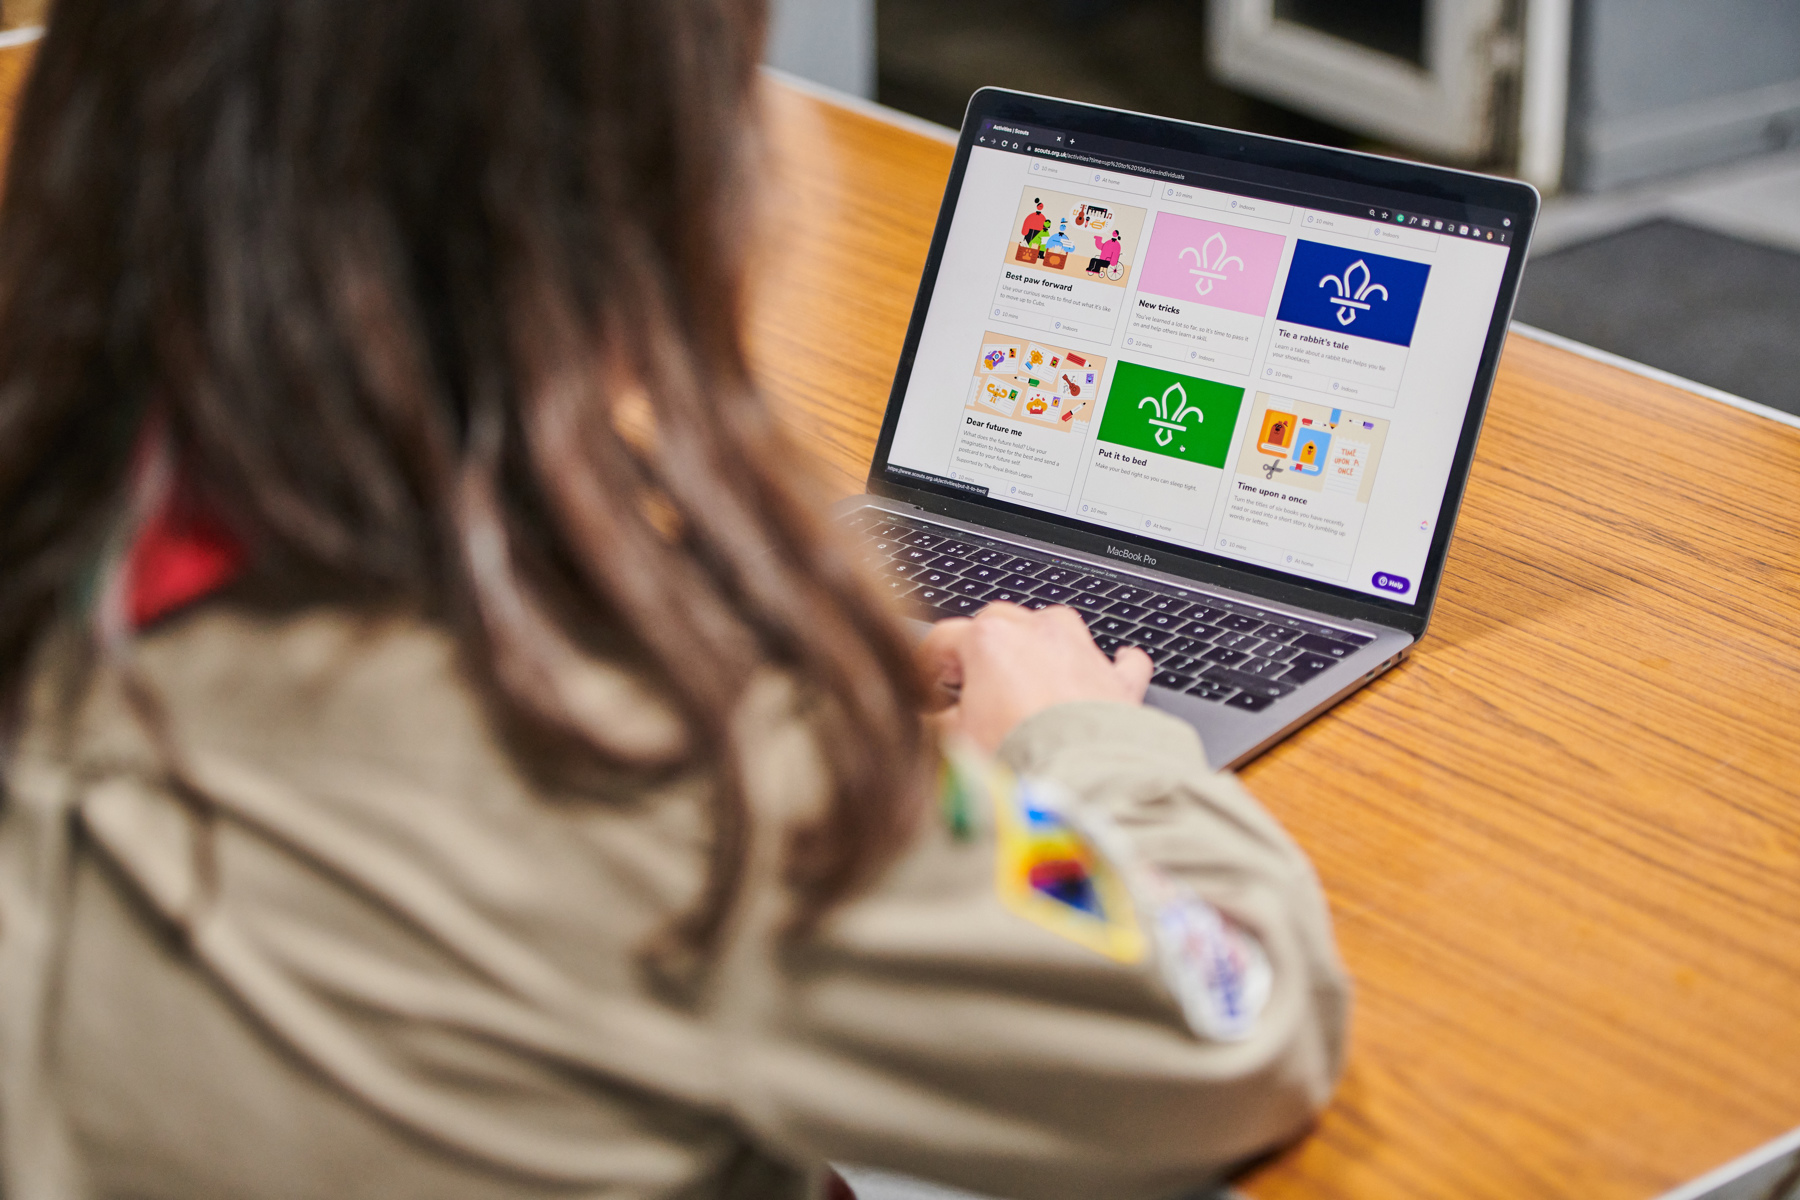 We can see the Scout activity finder website open on a laptop screen, with the laptop on a table. We're looking over the shoulder of a female Scout, who is scrolling through the page with her hand on the laptop.